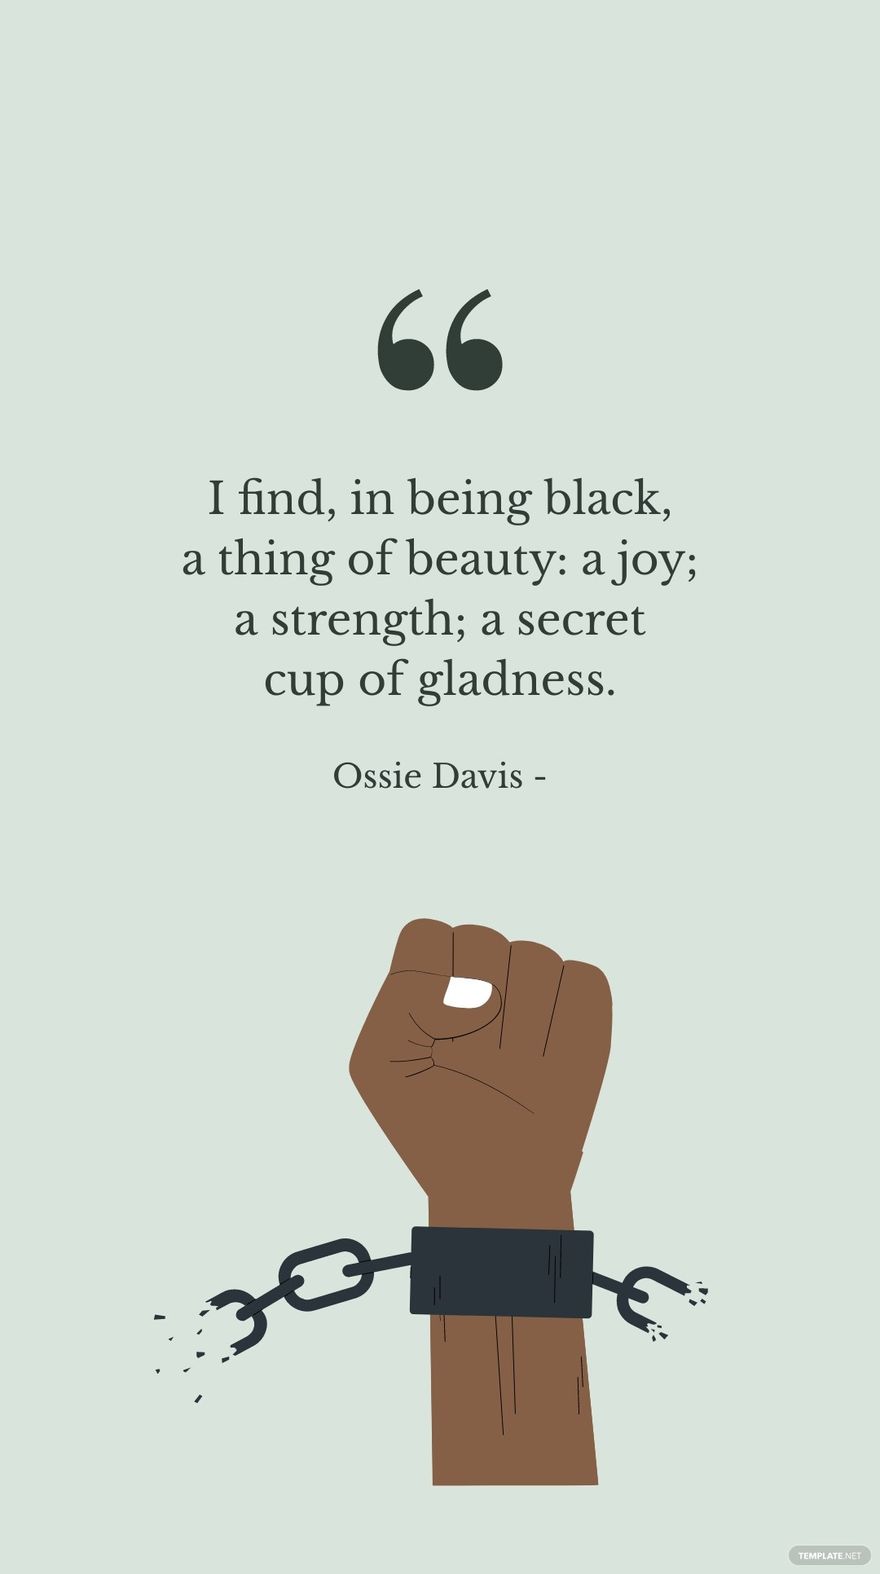 Ossie Davis - I find, in being black, a thing of beauty: a joy; a strength; a secret cup of gladness. in JPG